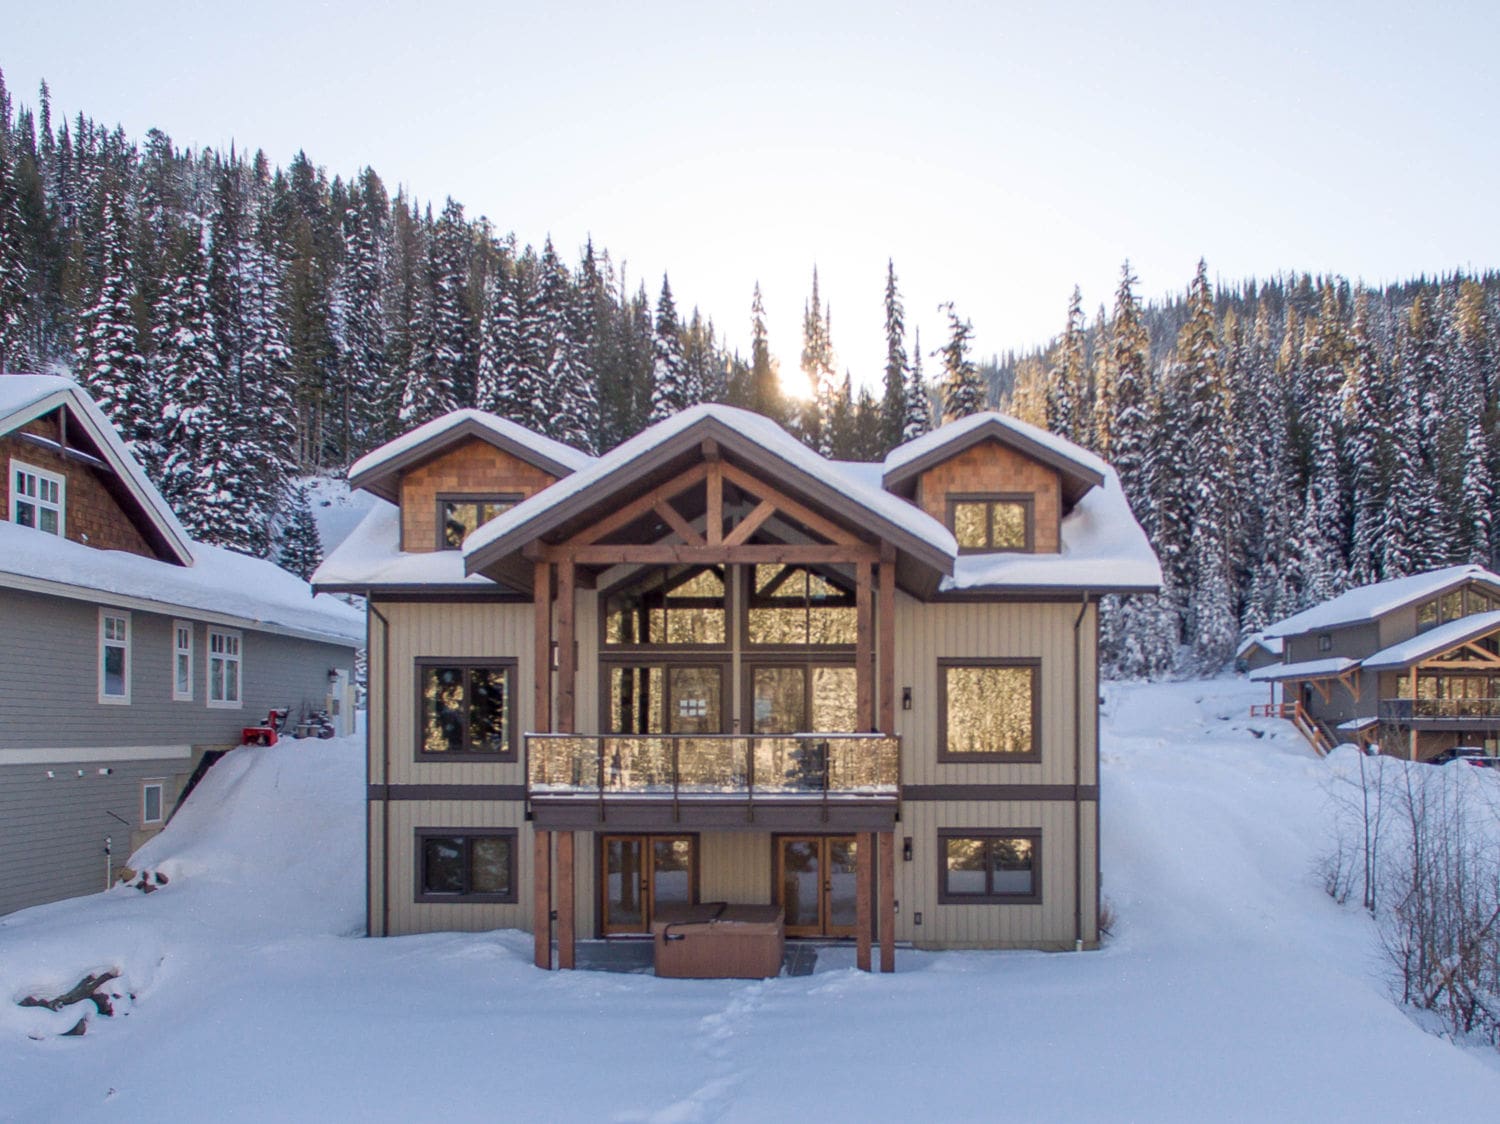 Outside view of a timber frame log home in the snow.